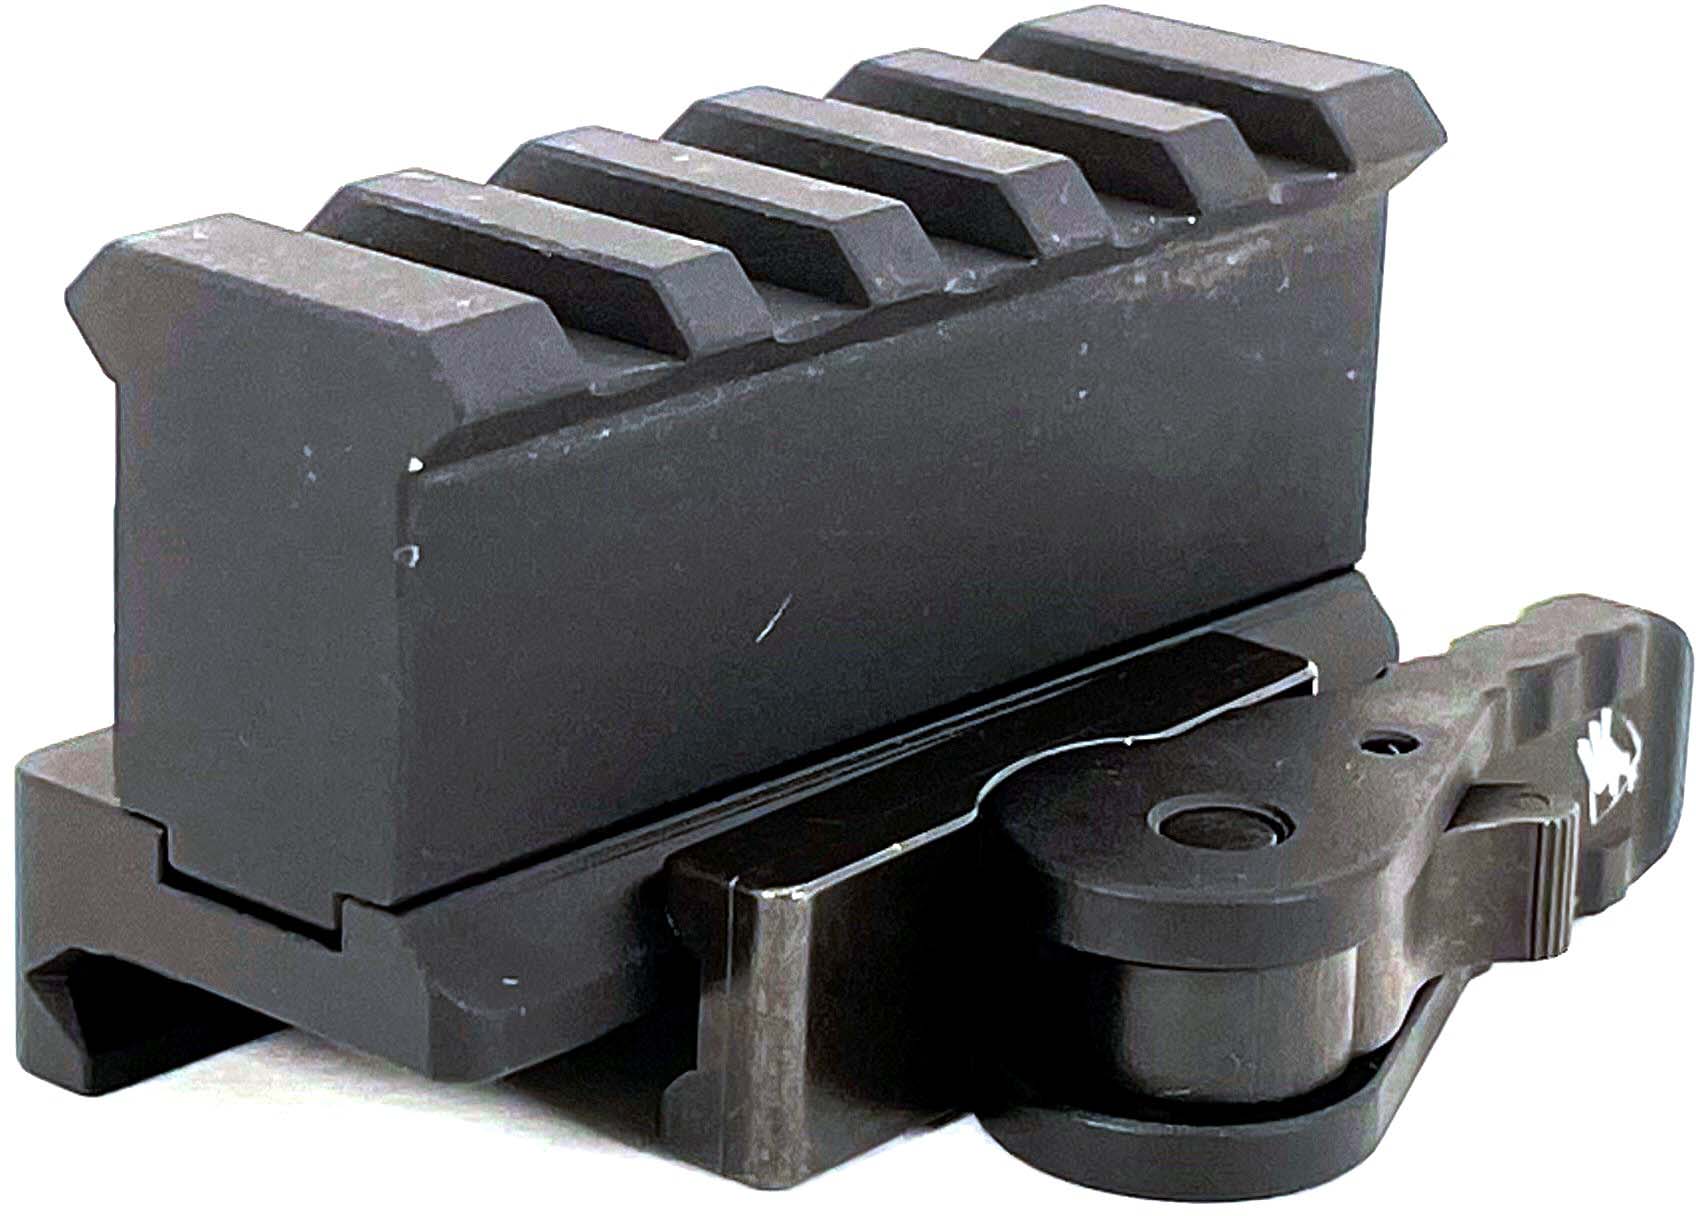 American Defense Manufacturing Picatinny Riser Mount | Up to $6.64 